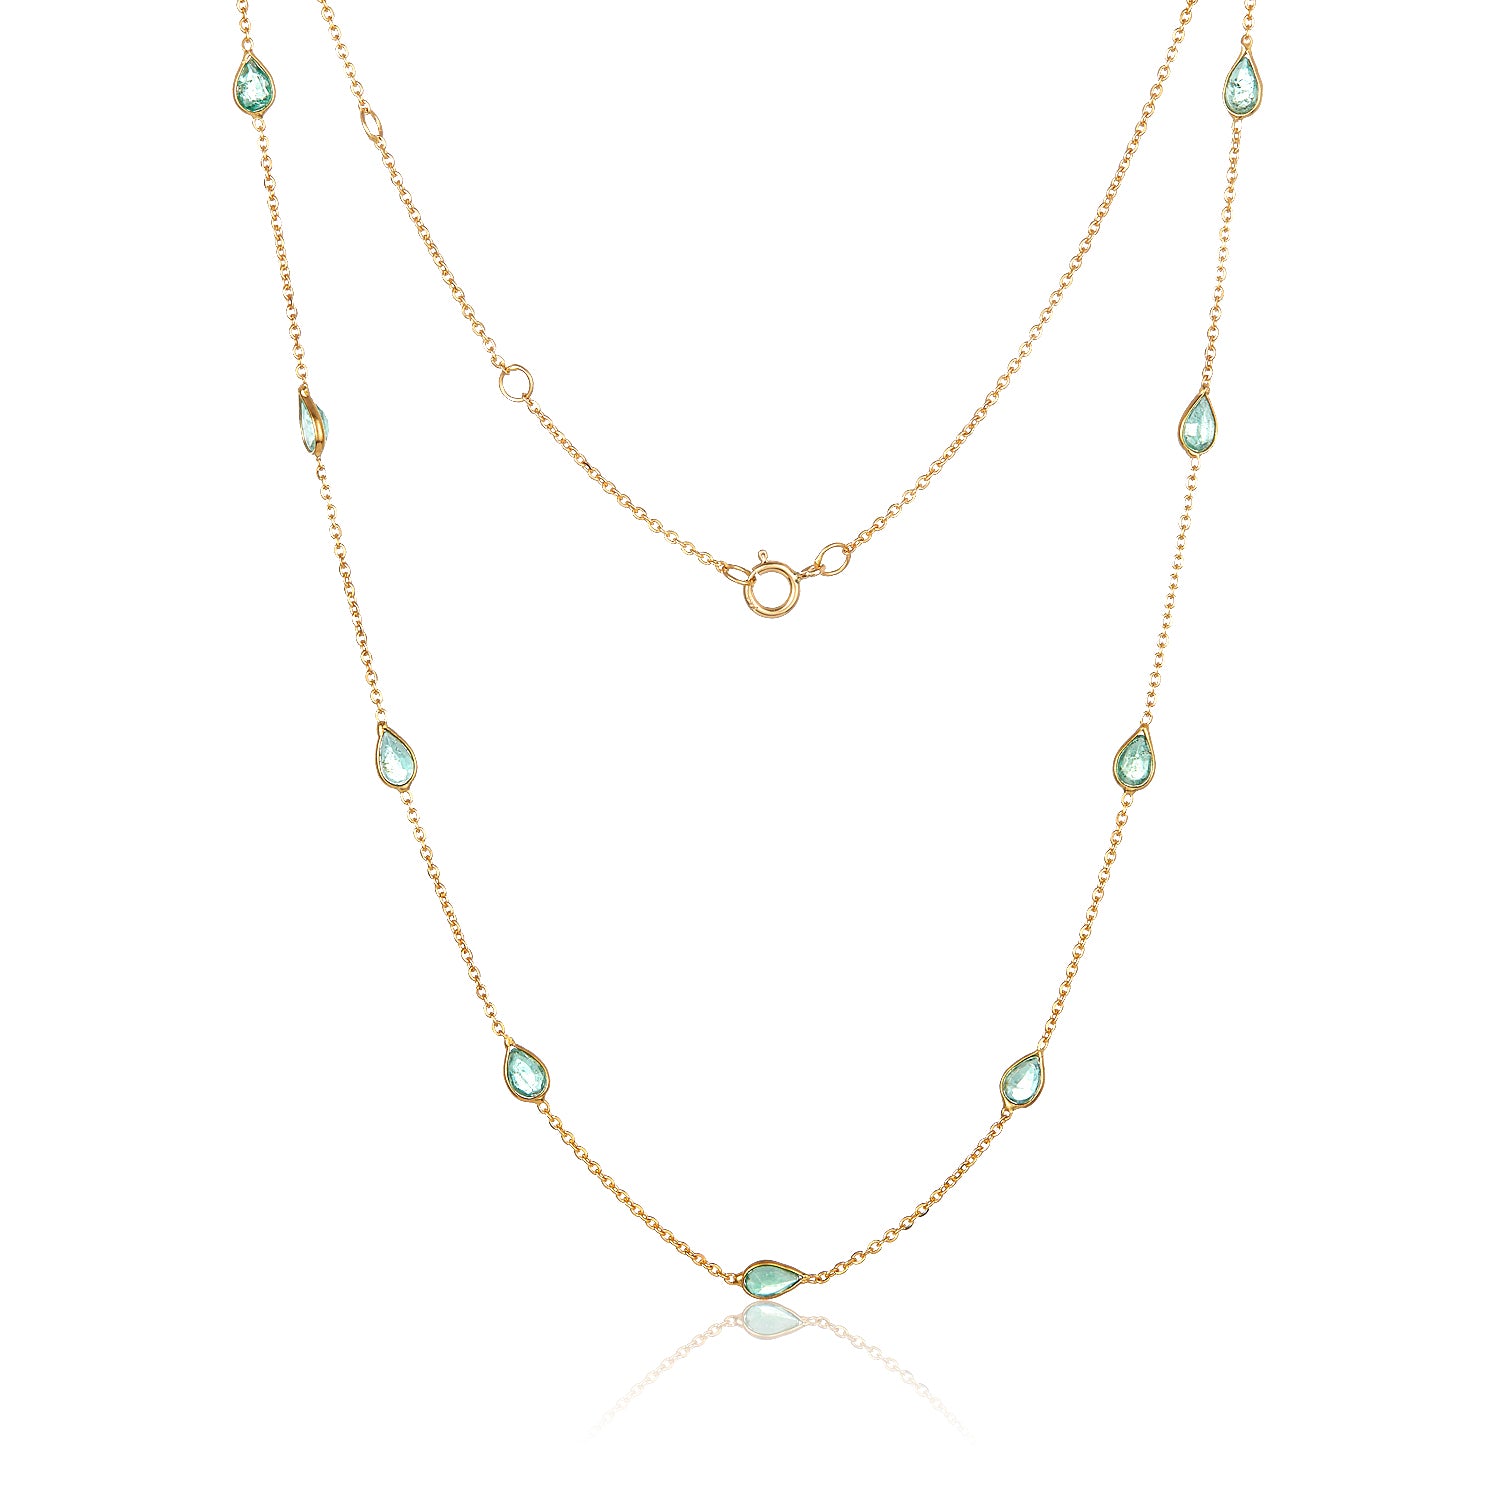 Emerald Section Necklace in 18k